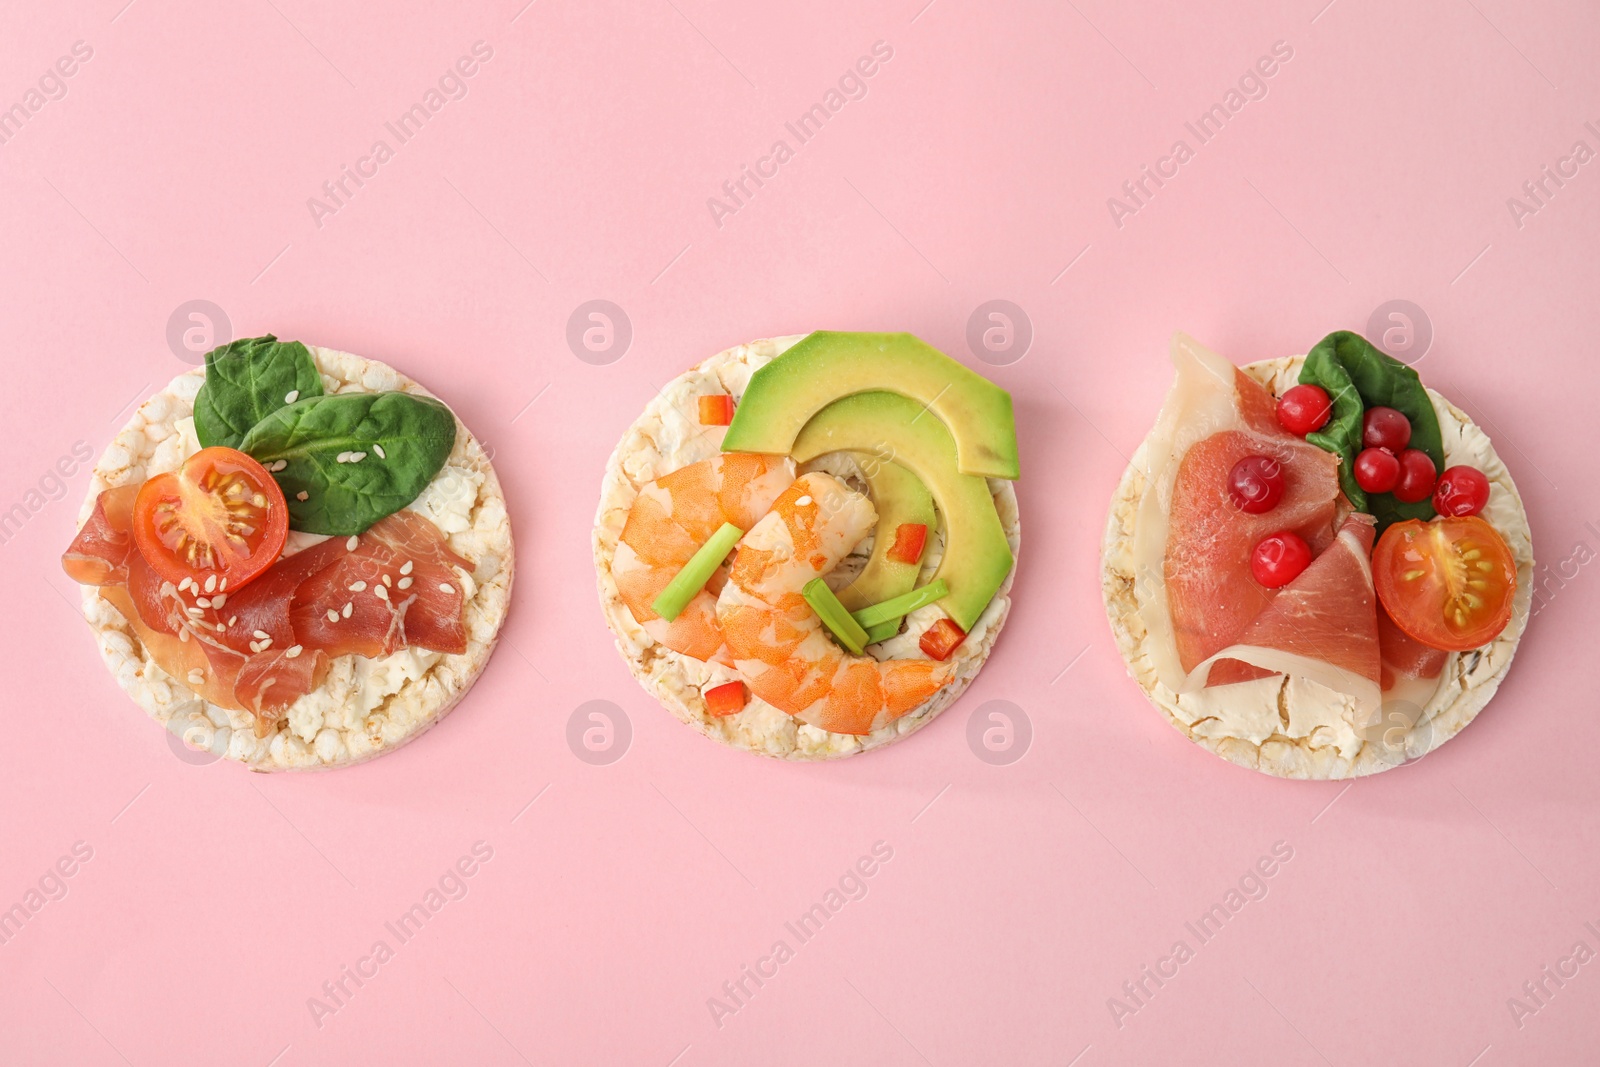 Photo of Puffed rice cakes with different toppings on pink background, flat lay